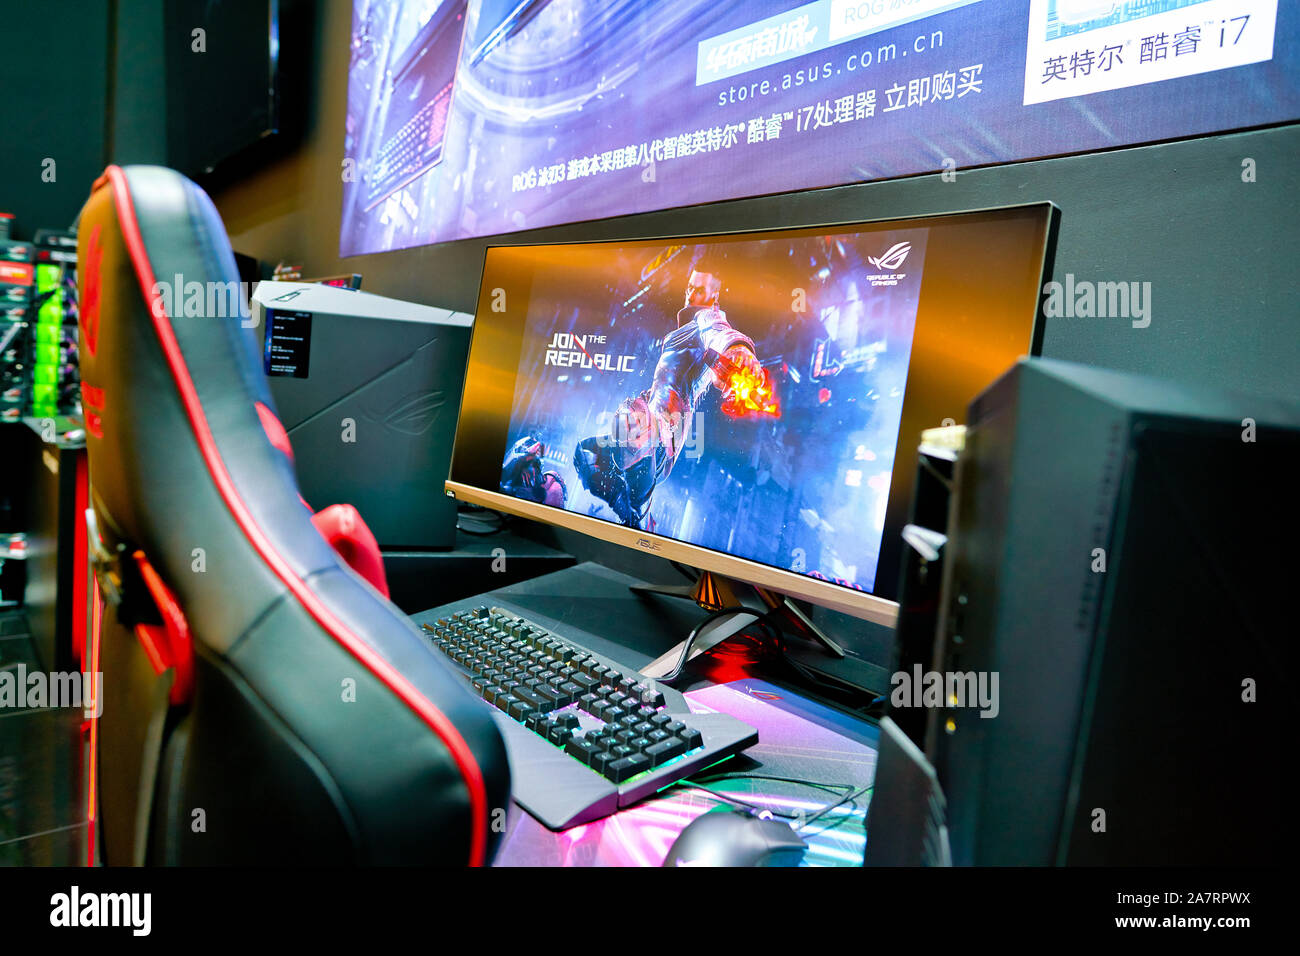 SHENZHEN, CHINA - CIRCA APRIL, 2019: interior shot of Asus ROG Store in Shenzhen. Republic of Gamers is a brand used by Asus. Stock Photo